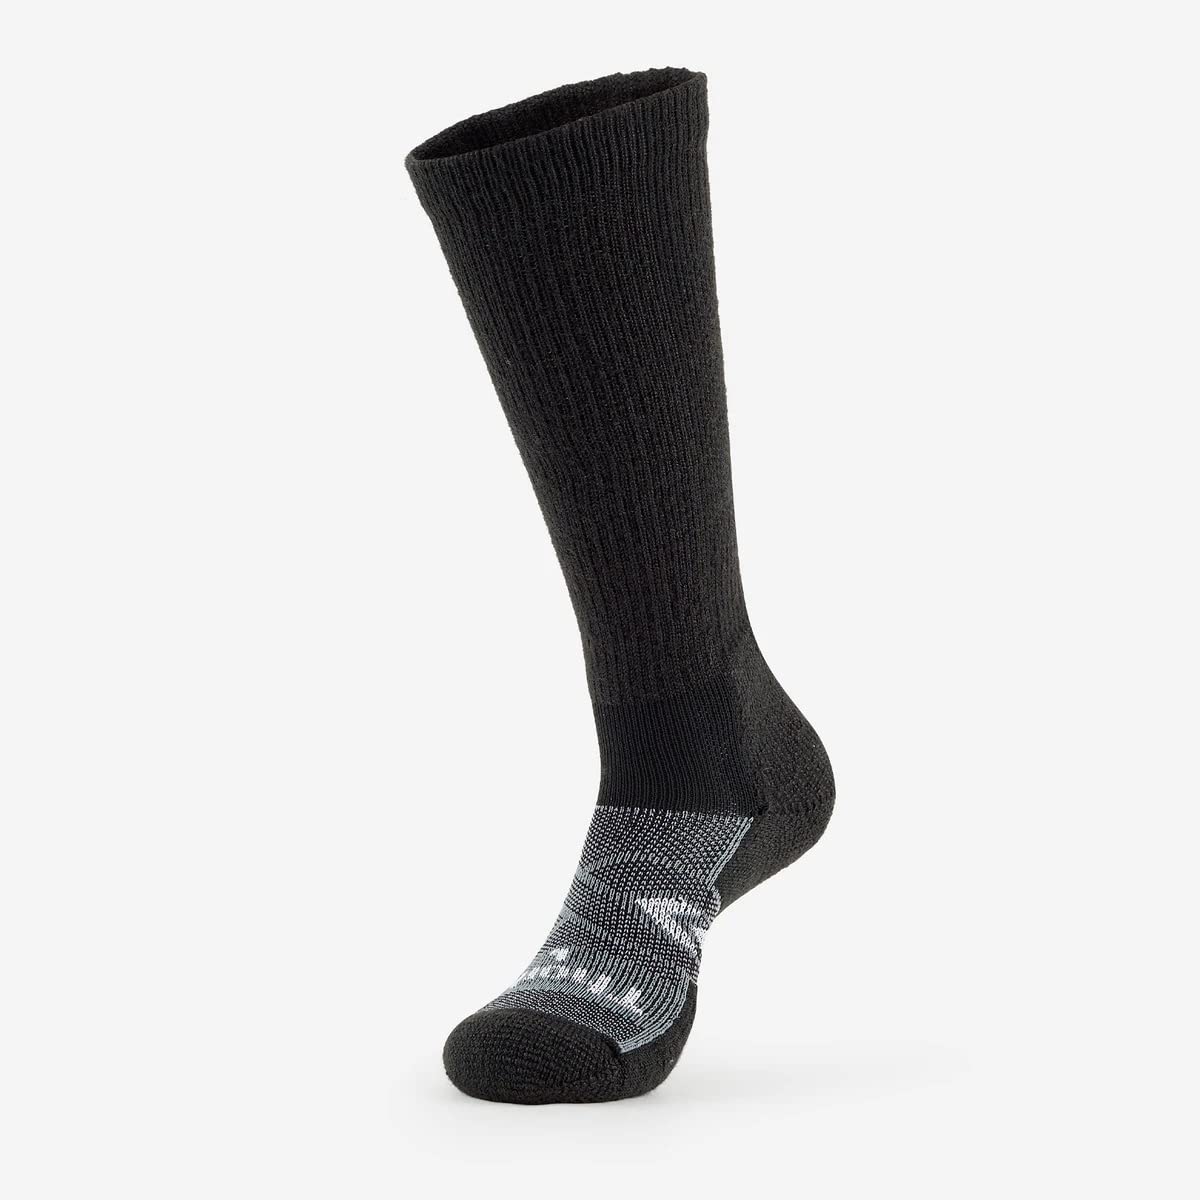 Thorlos Unisex Adult's 12 Hour Shift Thick Padded Over-The-Calf Work Socks, Black/Grey Large